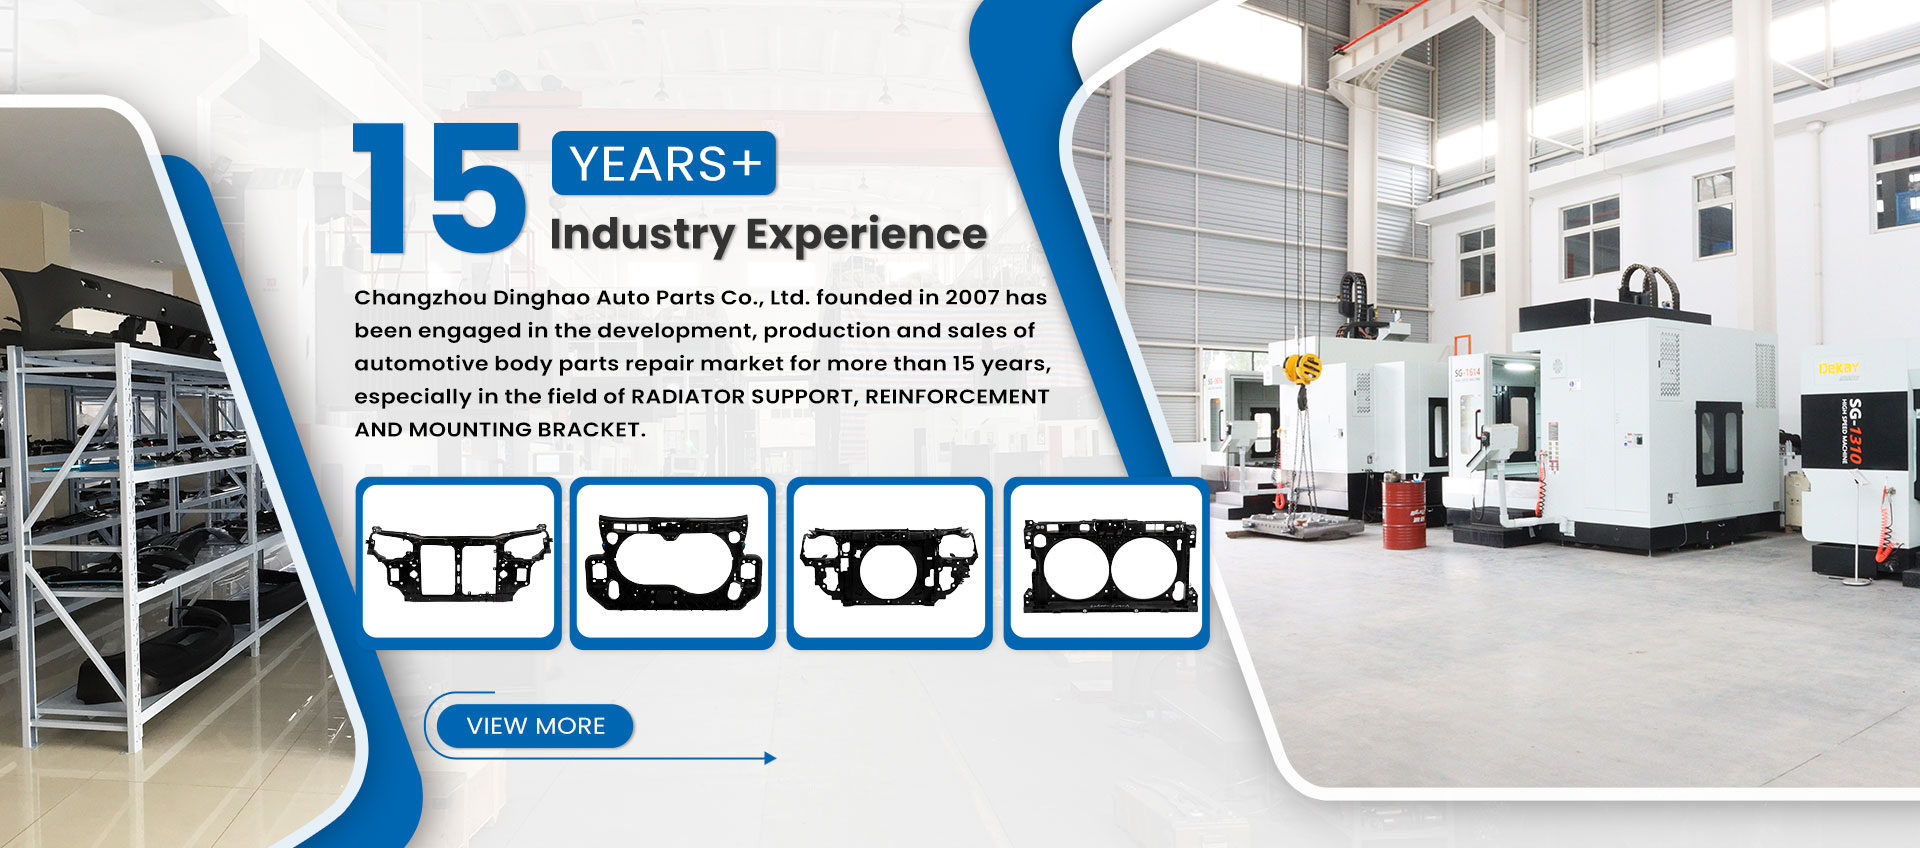 15 years Industry Experience